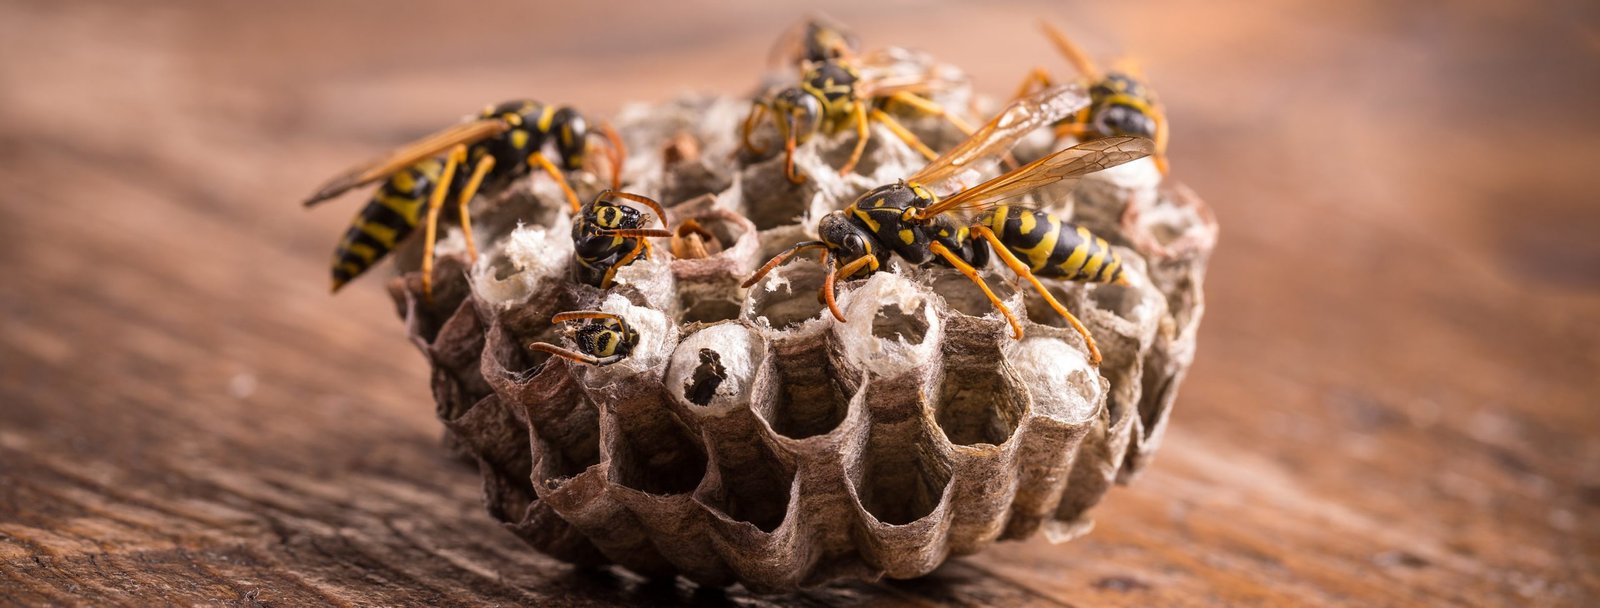 Photo of paper wasp nest on wooden board